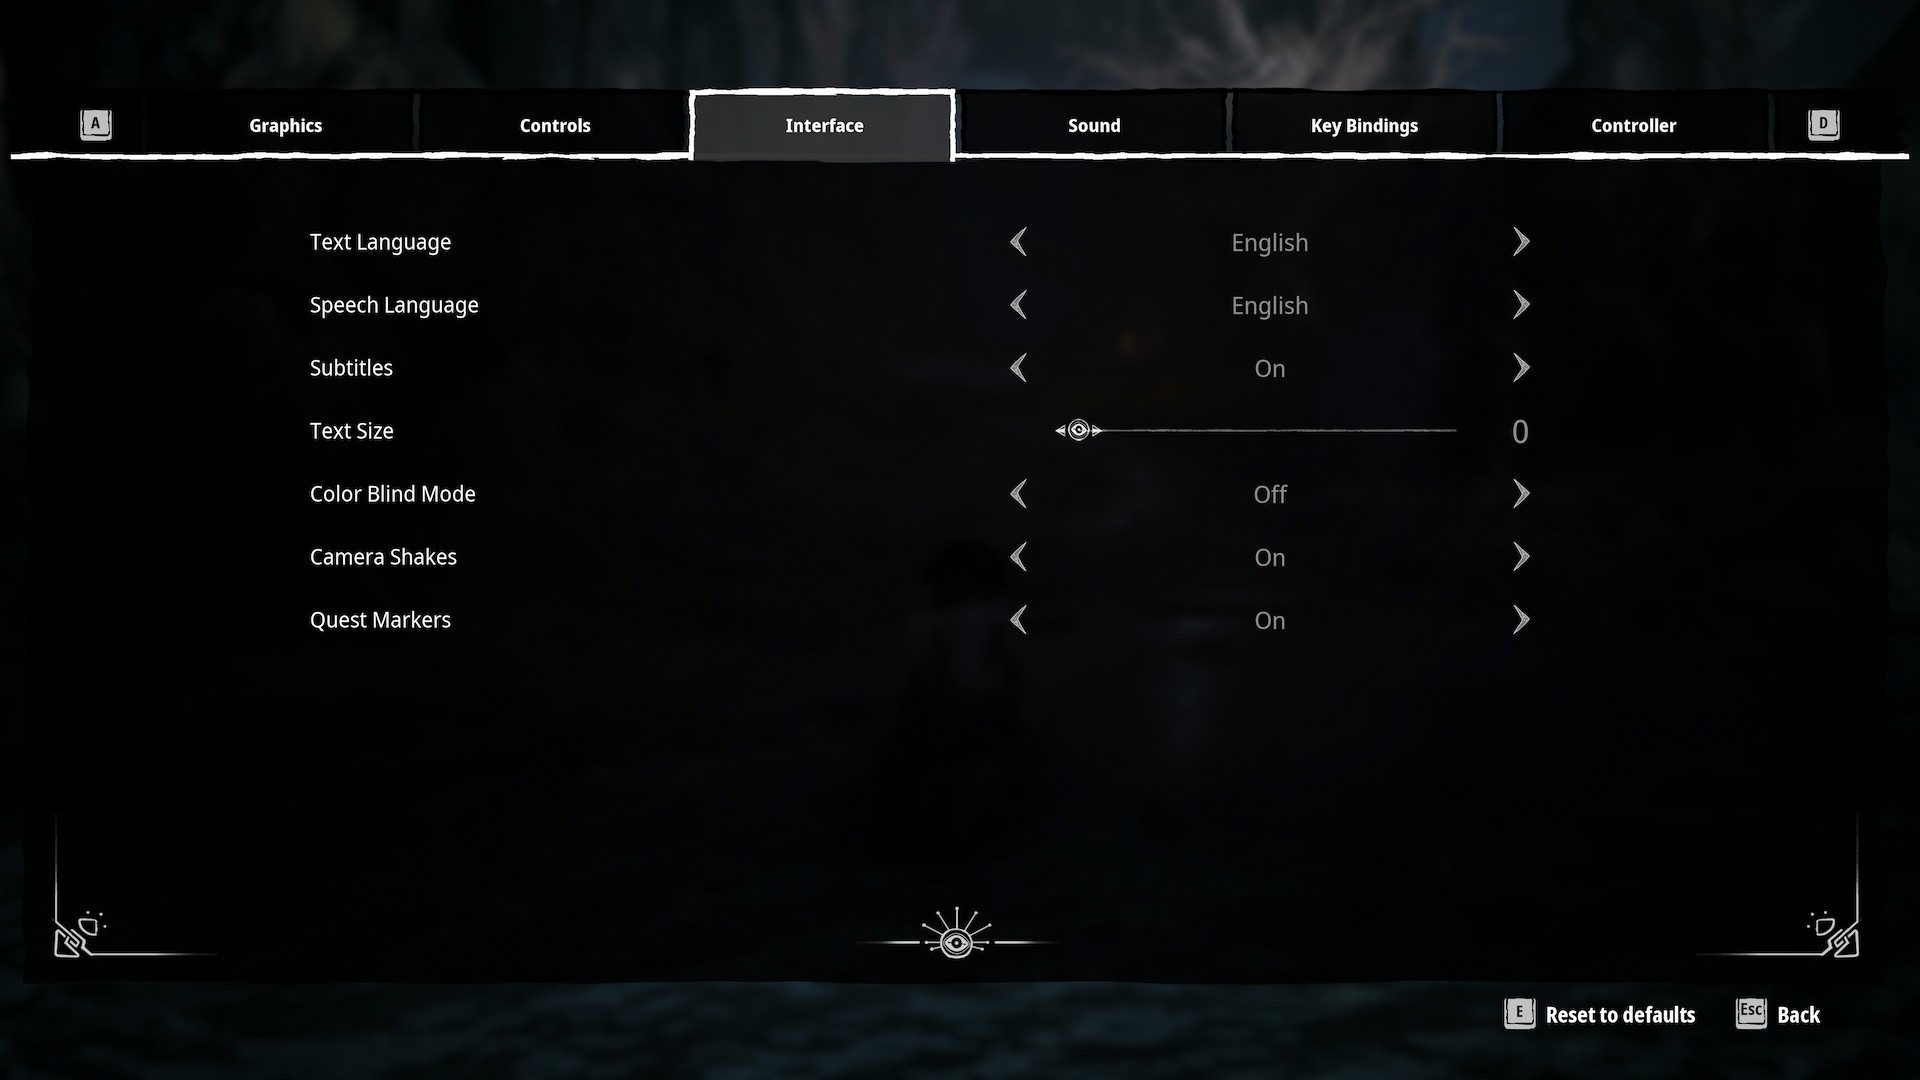 A screenshot of The Lord of the Rings Gollum's accesibility settings